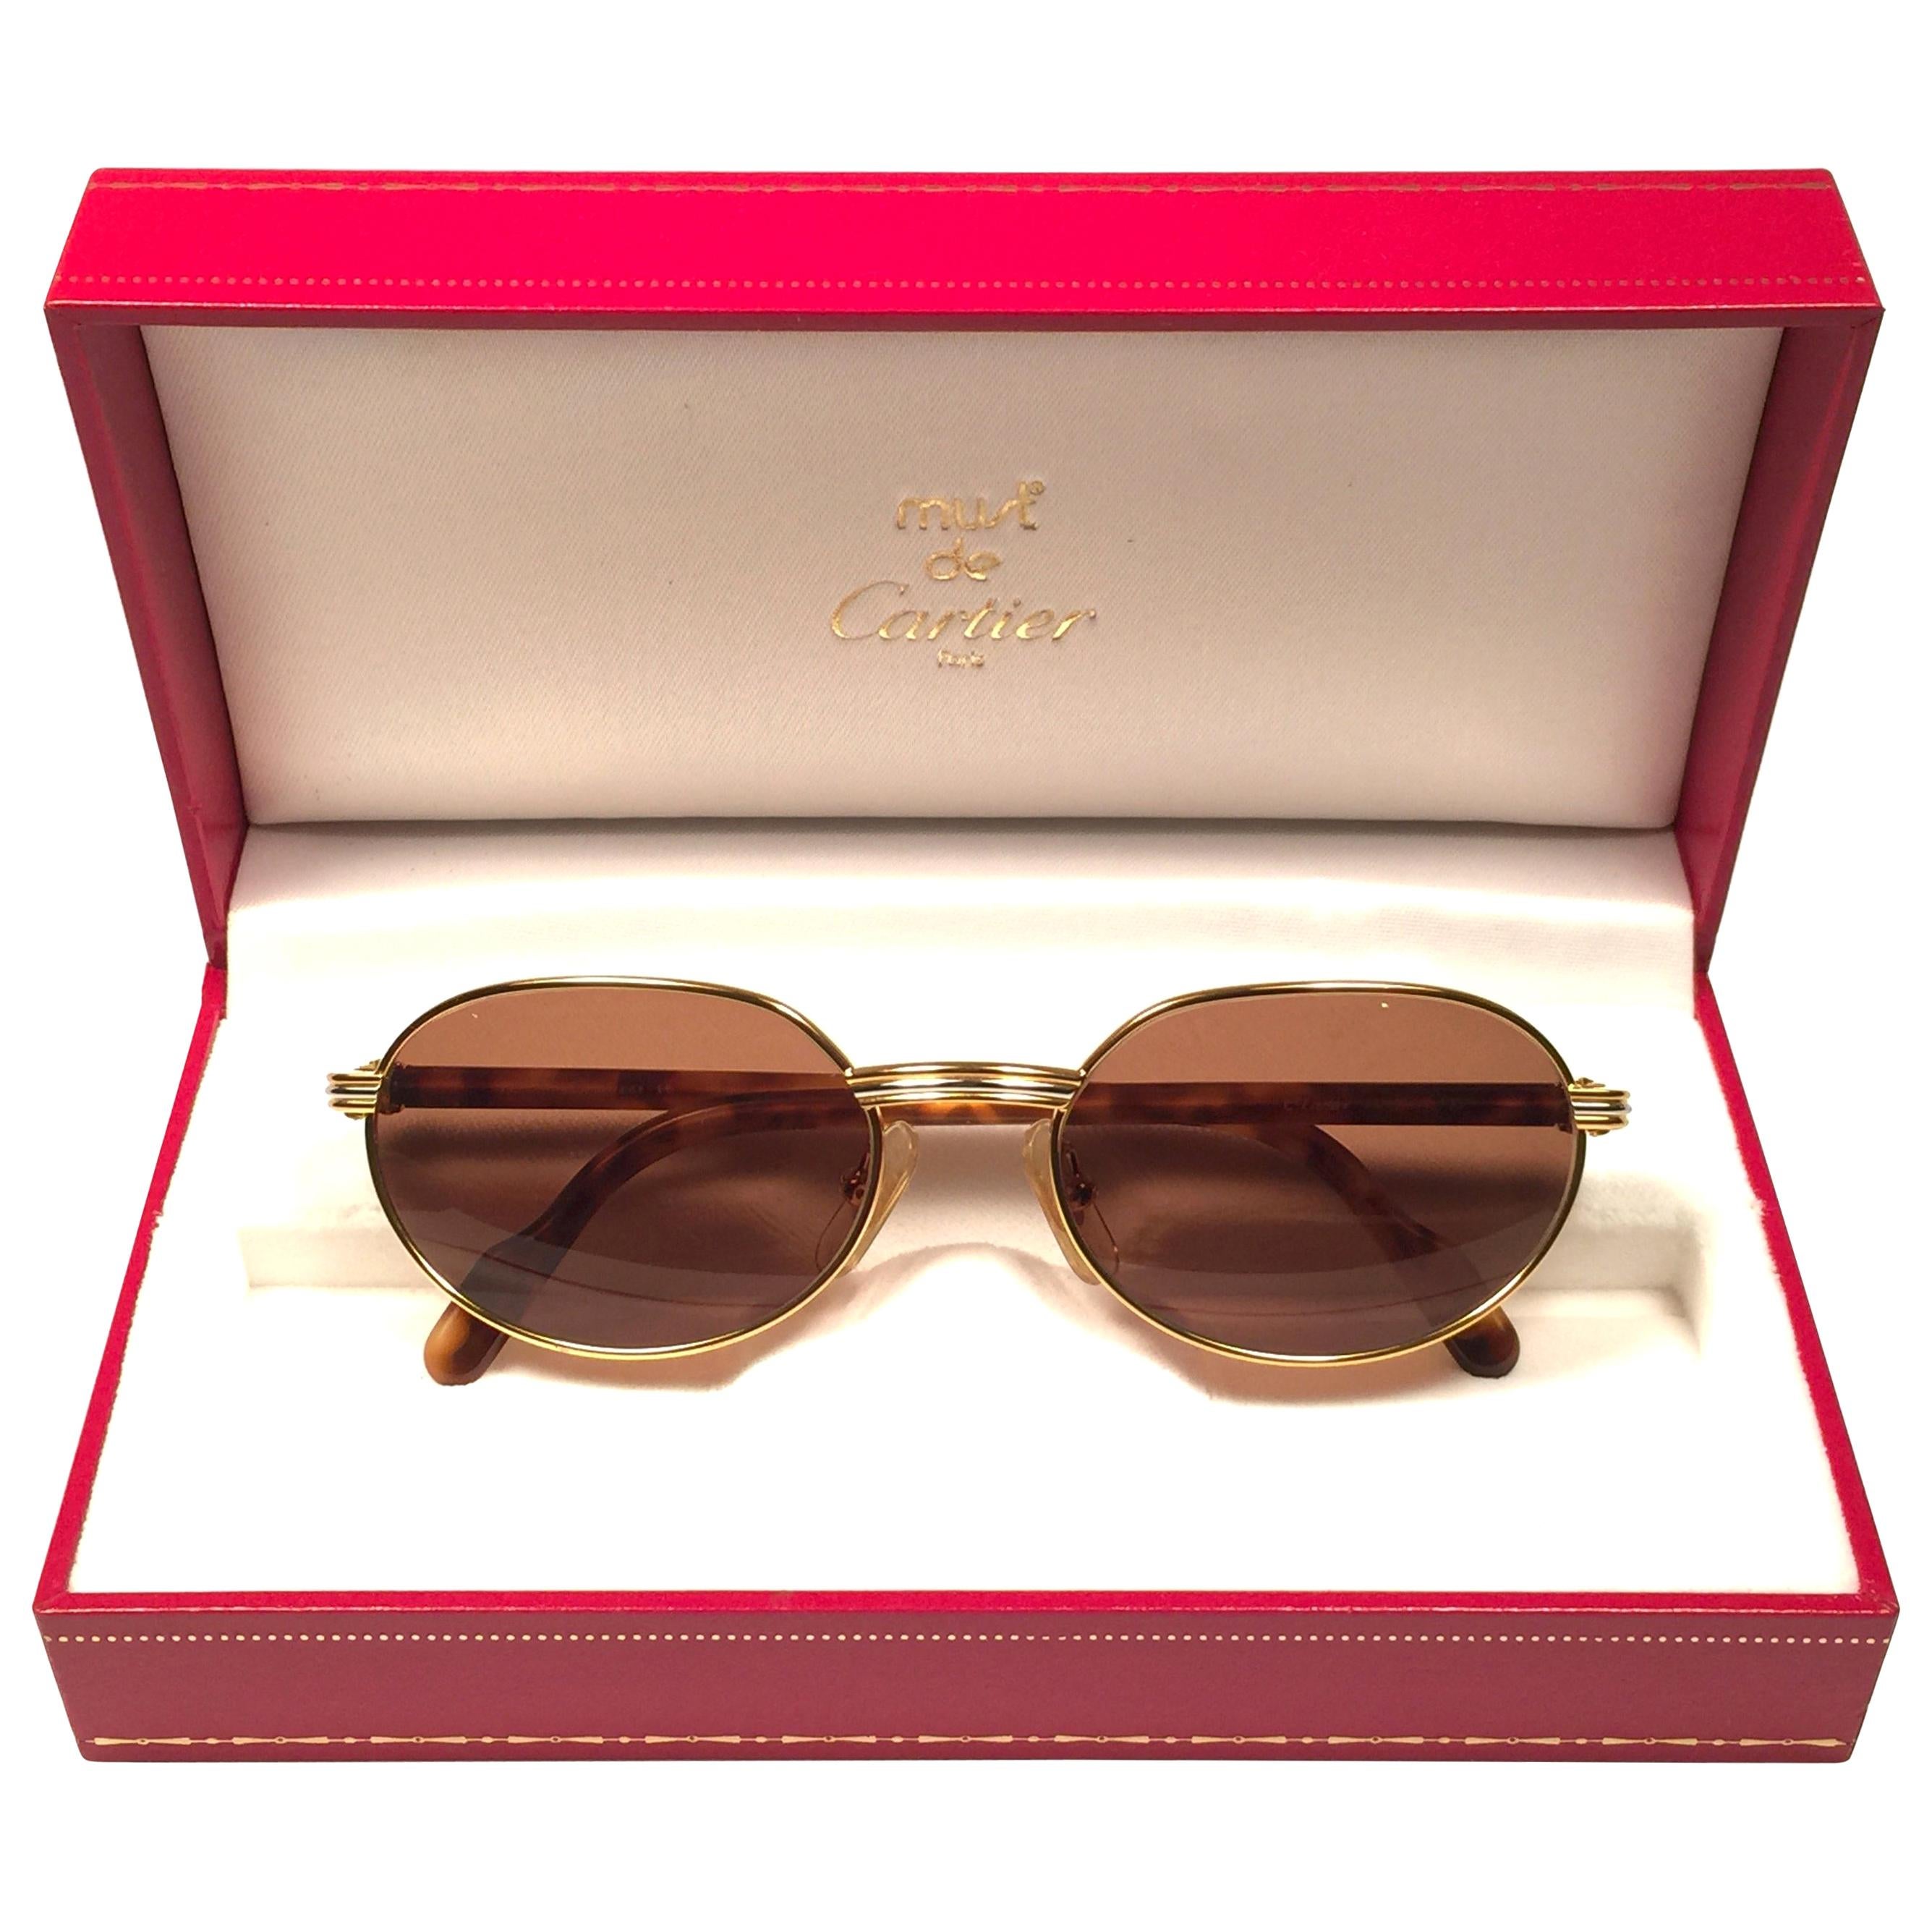 New Cartier Classic Oval Lueur 51mm Gold Plated Sunglasses Made in France